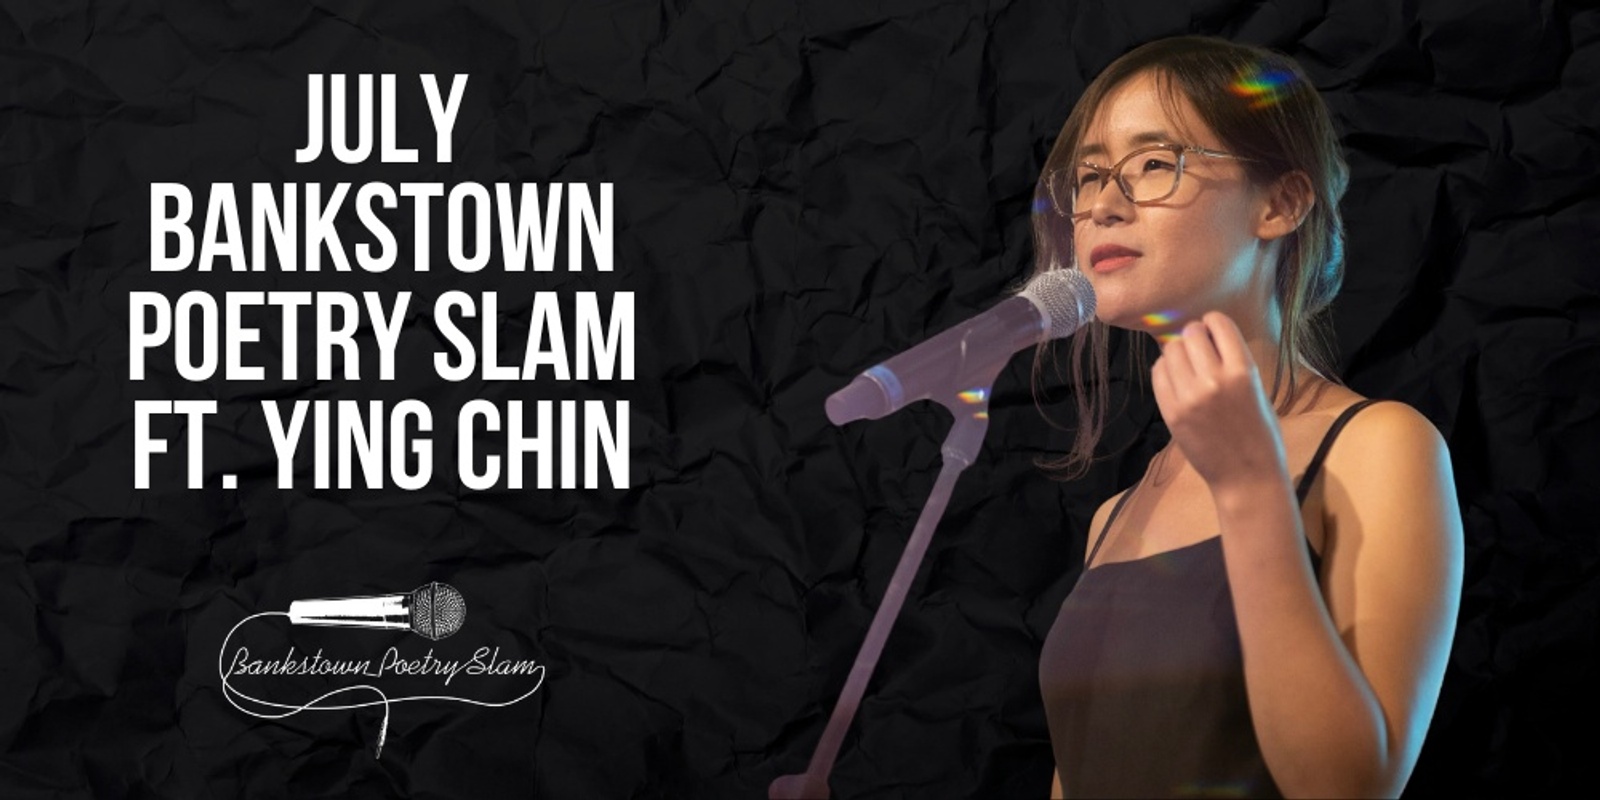 Banner image for July Bankstown Poetry Slam ft. Ying Chin